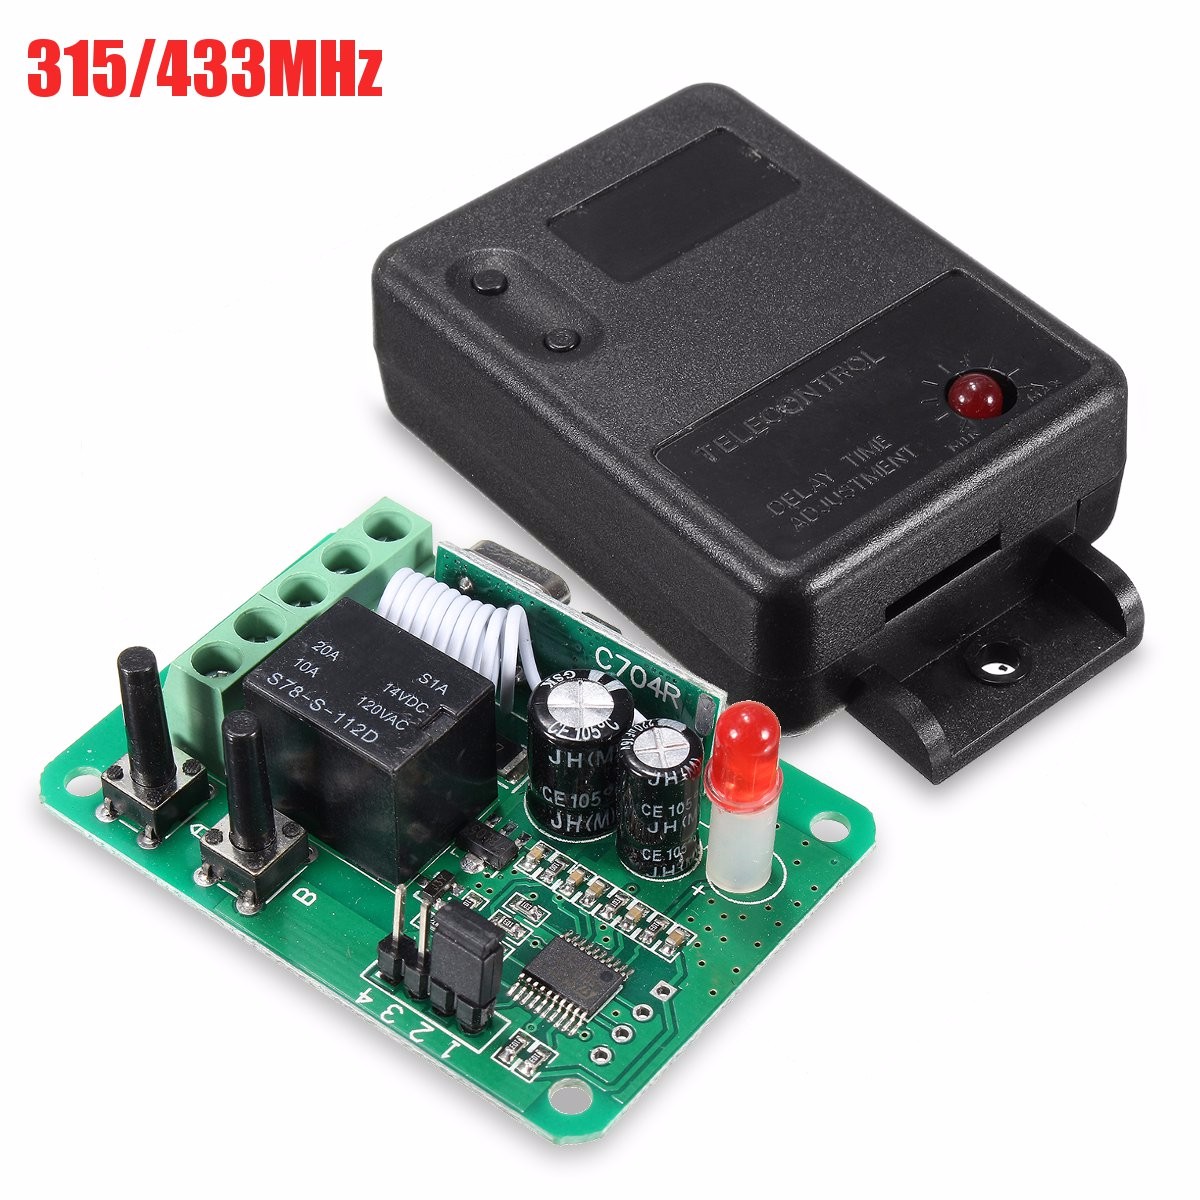 DC12V-1CH-315433MHz-Wireless-Time-Delay-Relay-RF-Remote-Control-Switch-Receiver-1150044-4